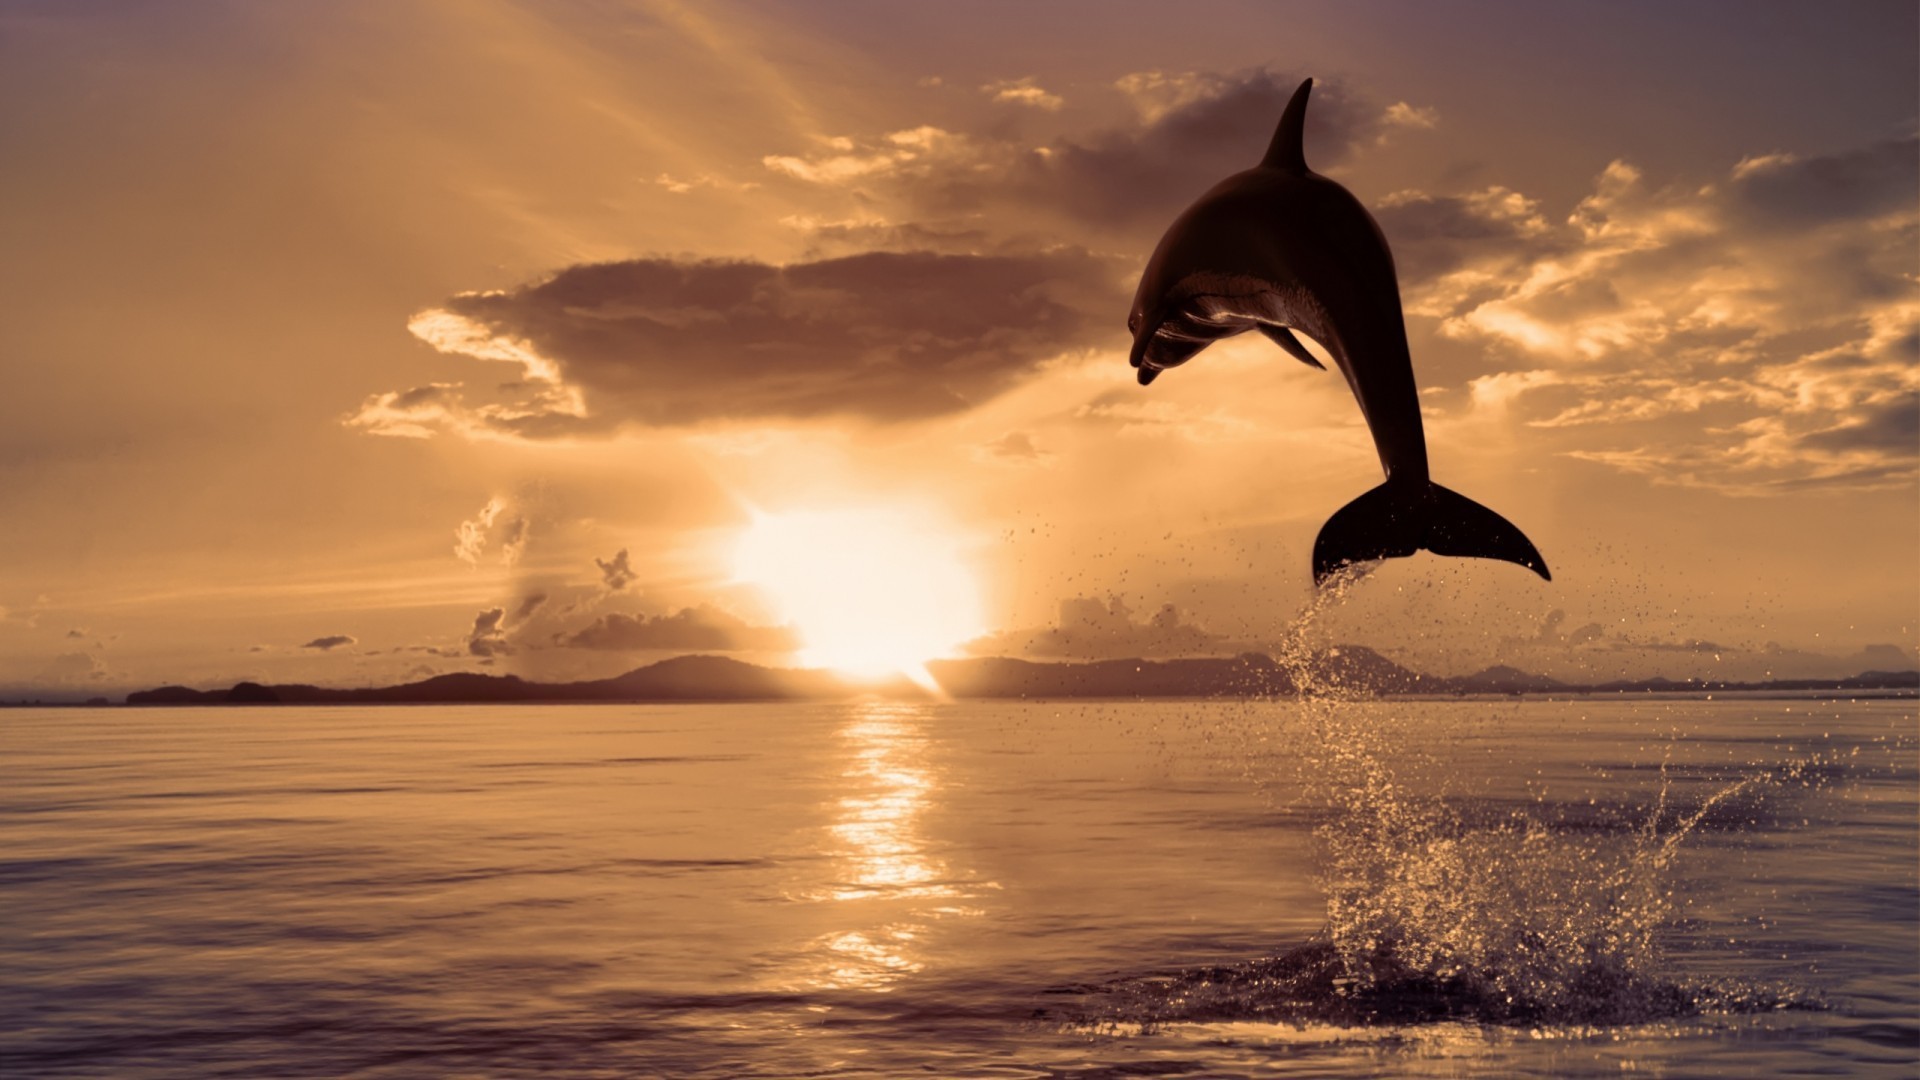 Dolphin jumping out of high water wallpapers and images - wallpapers